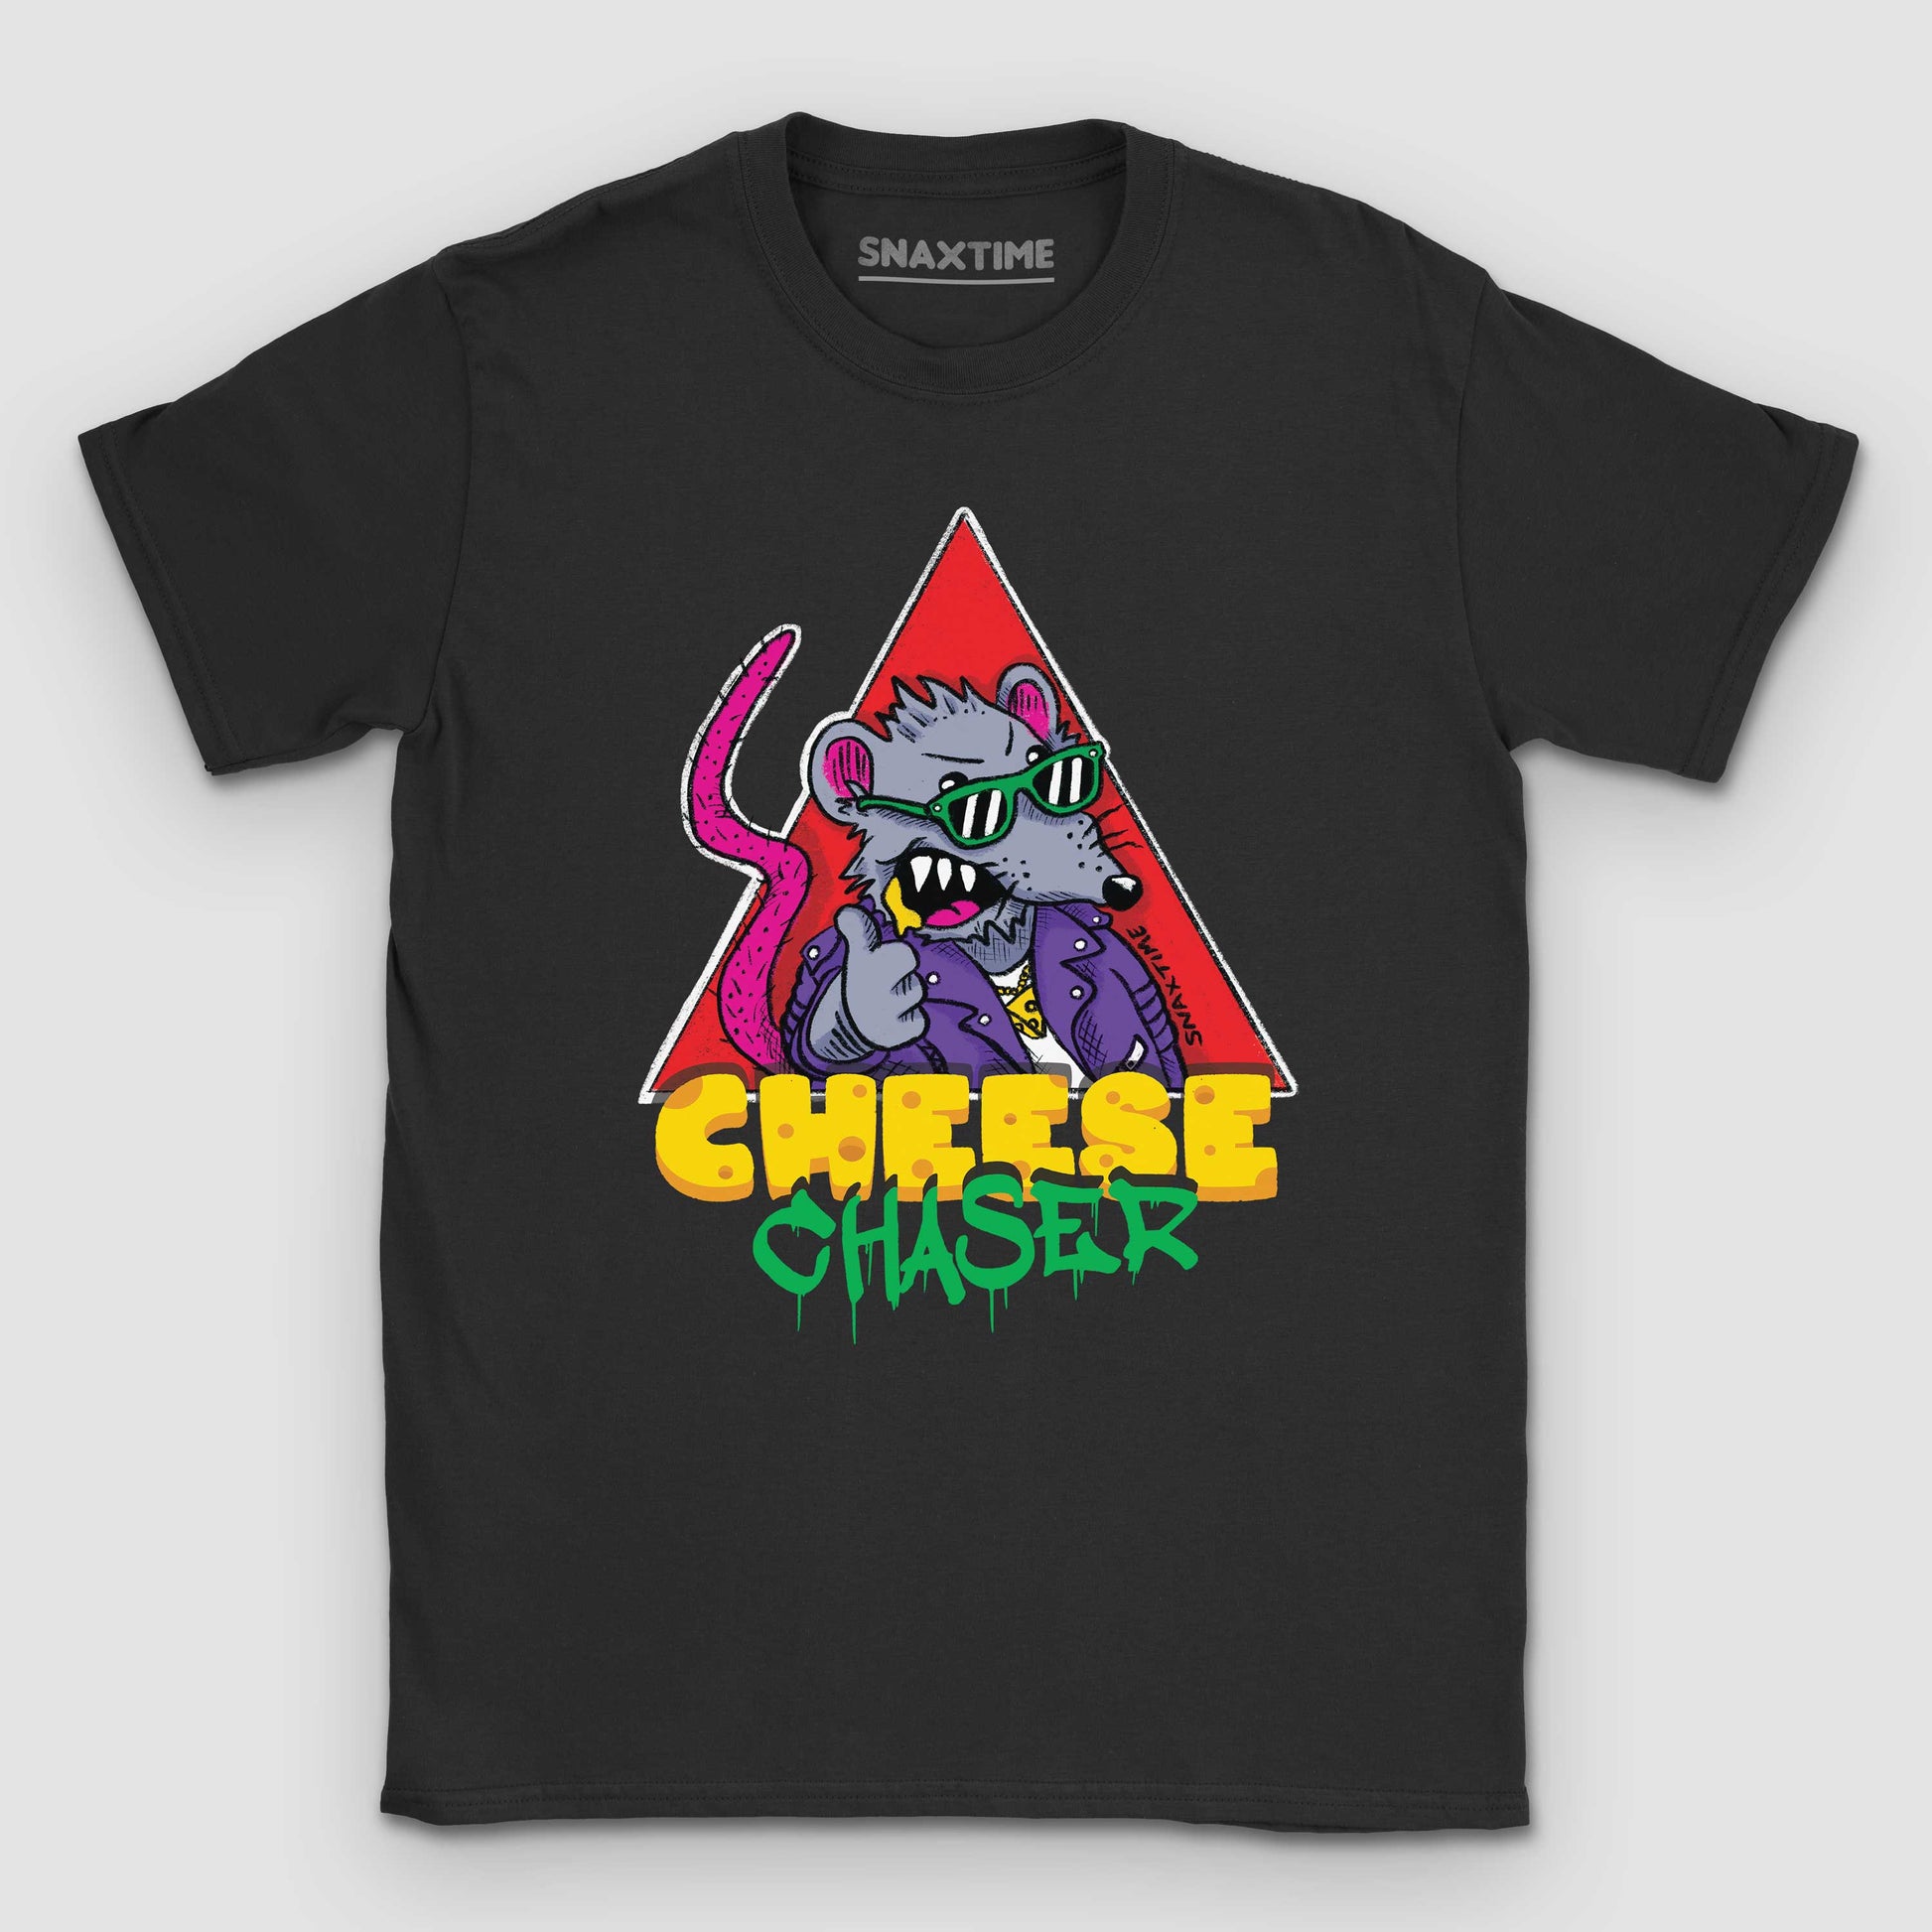  Cheese Chaser Cartoon Graphic T-Shirt by Snaxtime